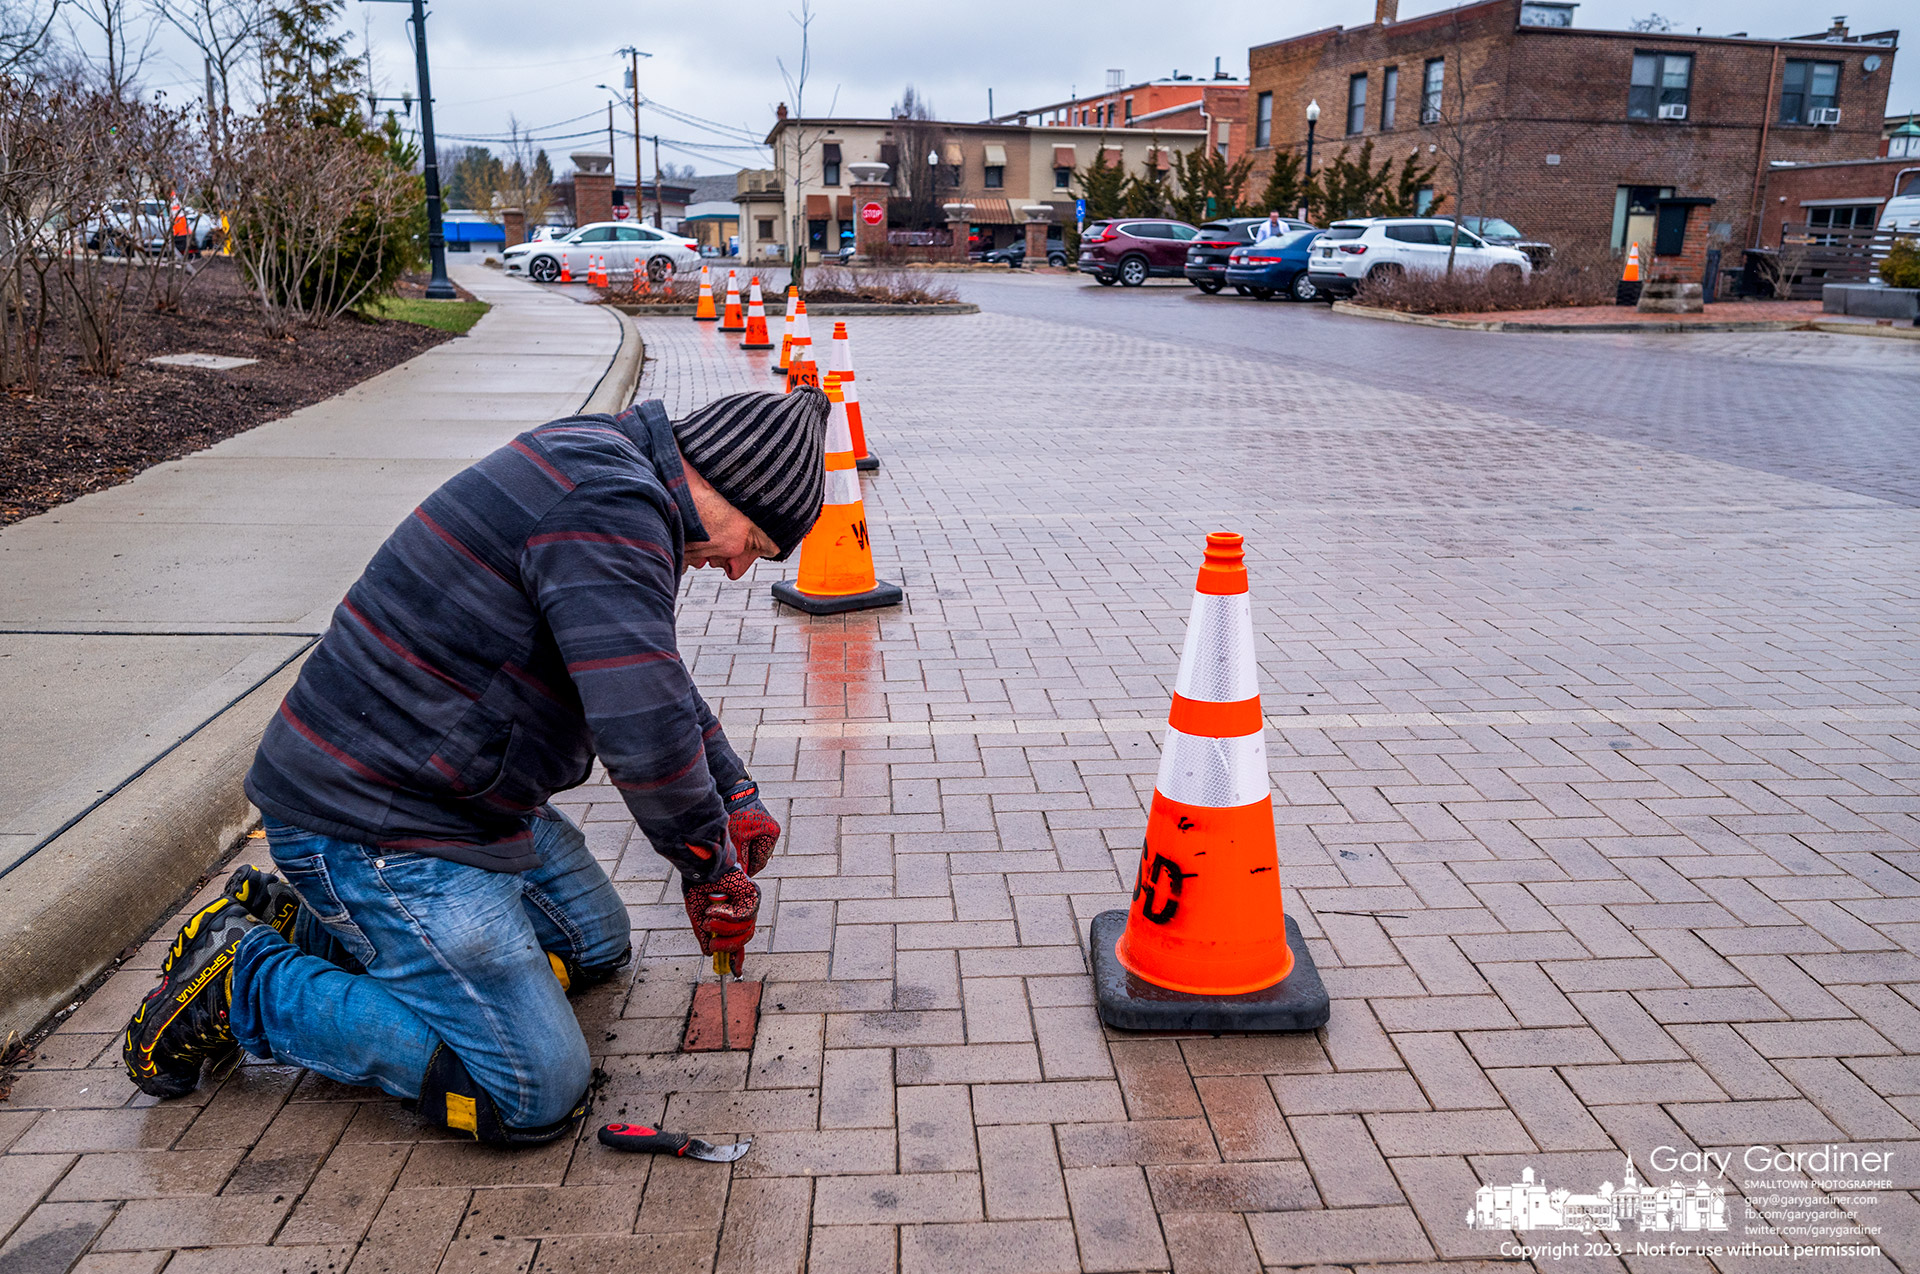 Technicians replace parking sensors in the city hall parking lot as the city upgrades the original almost two-year-old trial version of the system with longer-lasting sensors to feed information to an app detailing open parking spots in Uptown. My Final Photo for March 13, 2023.